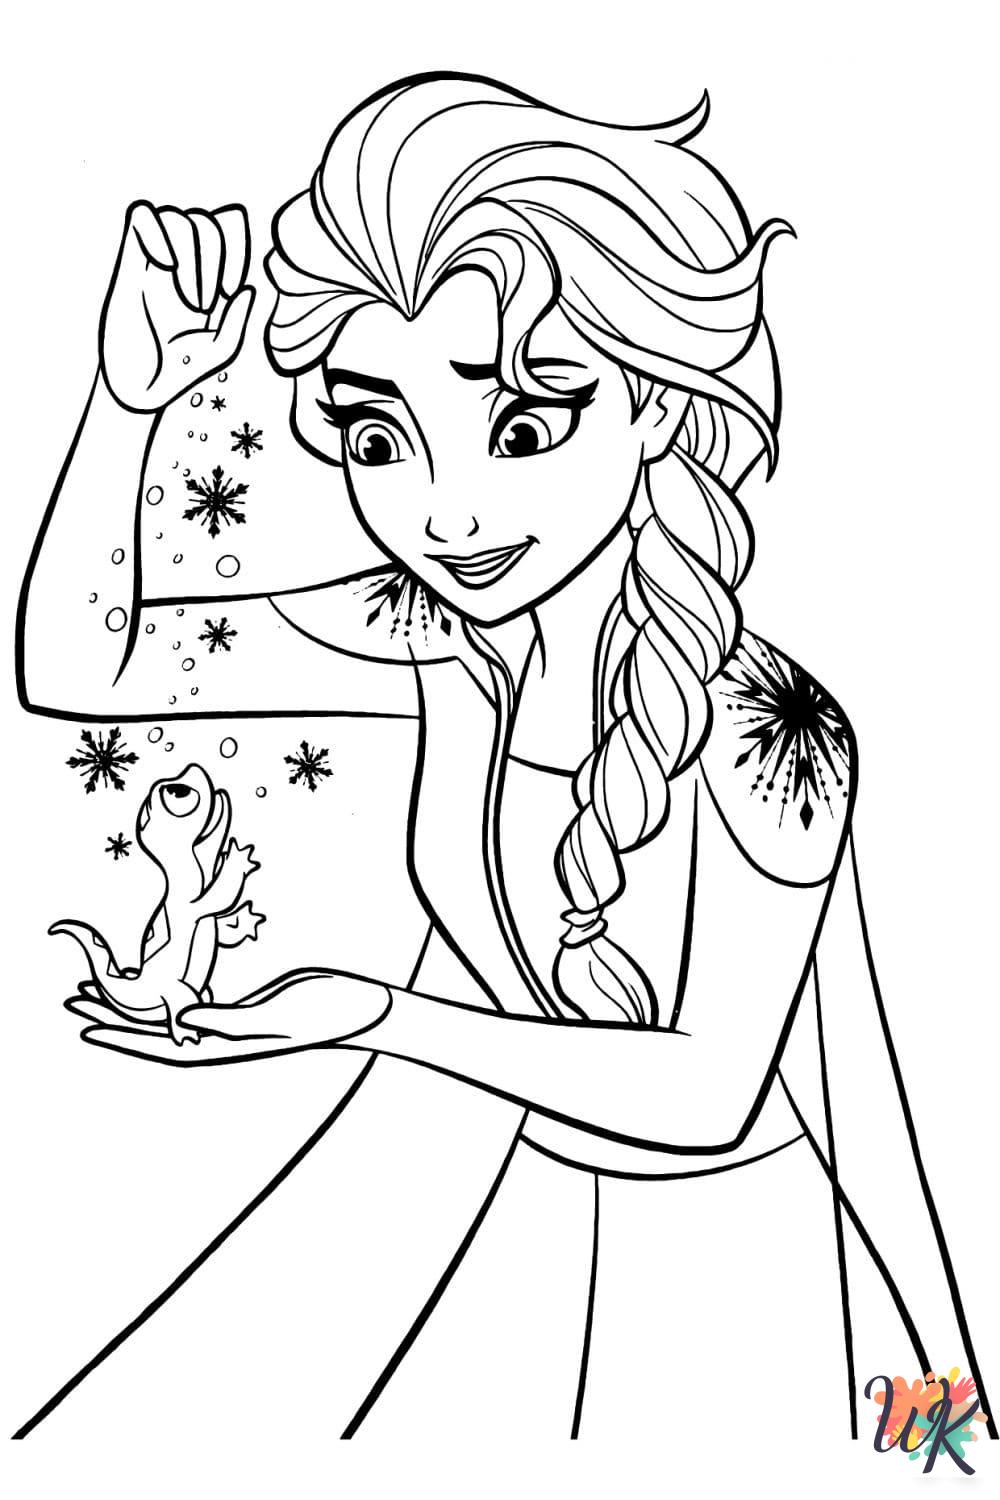 Elsa coloring pages printable